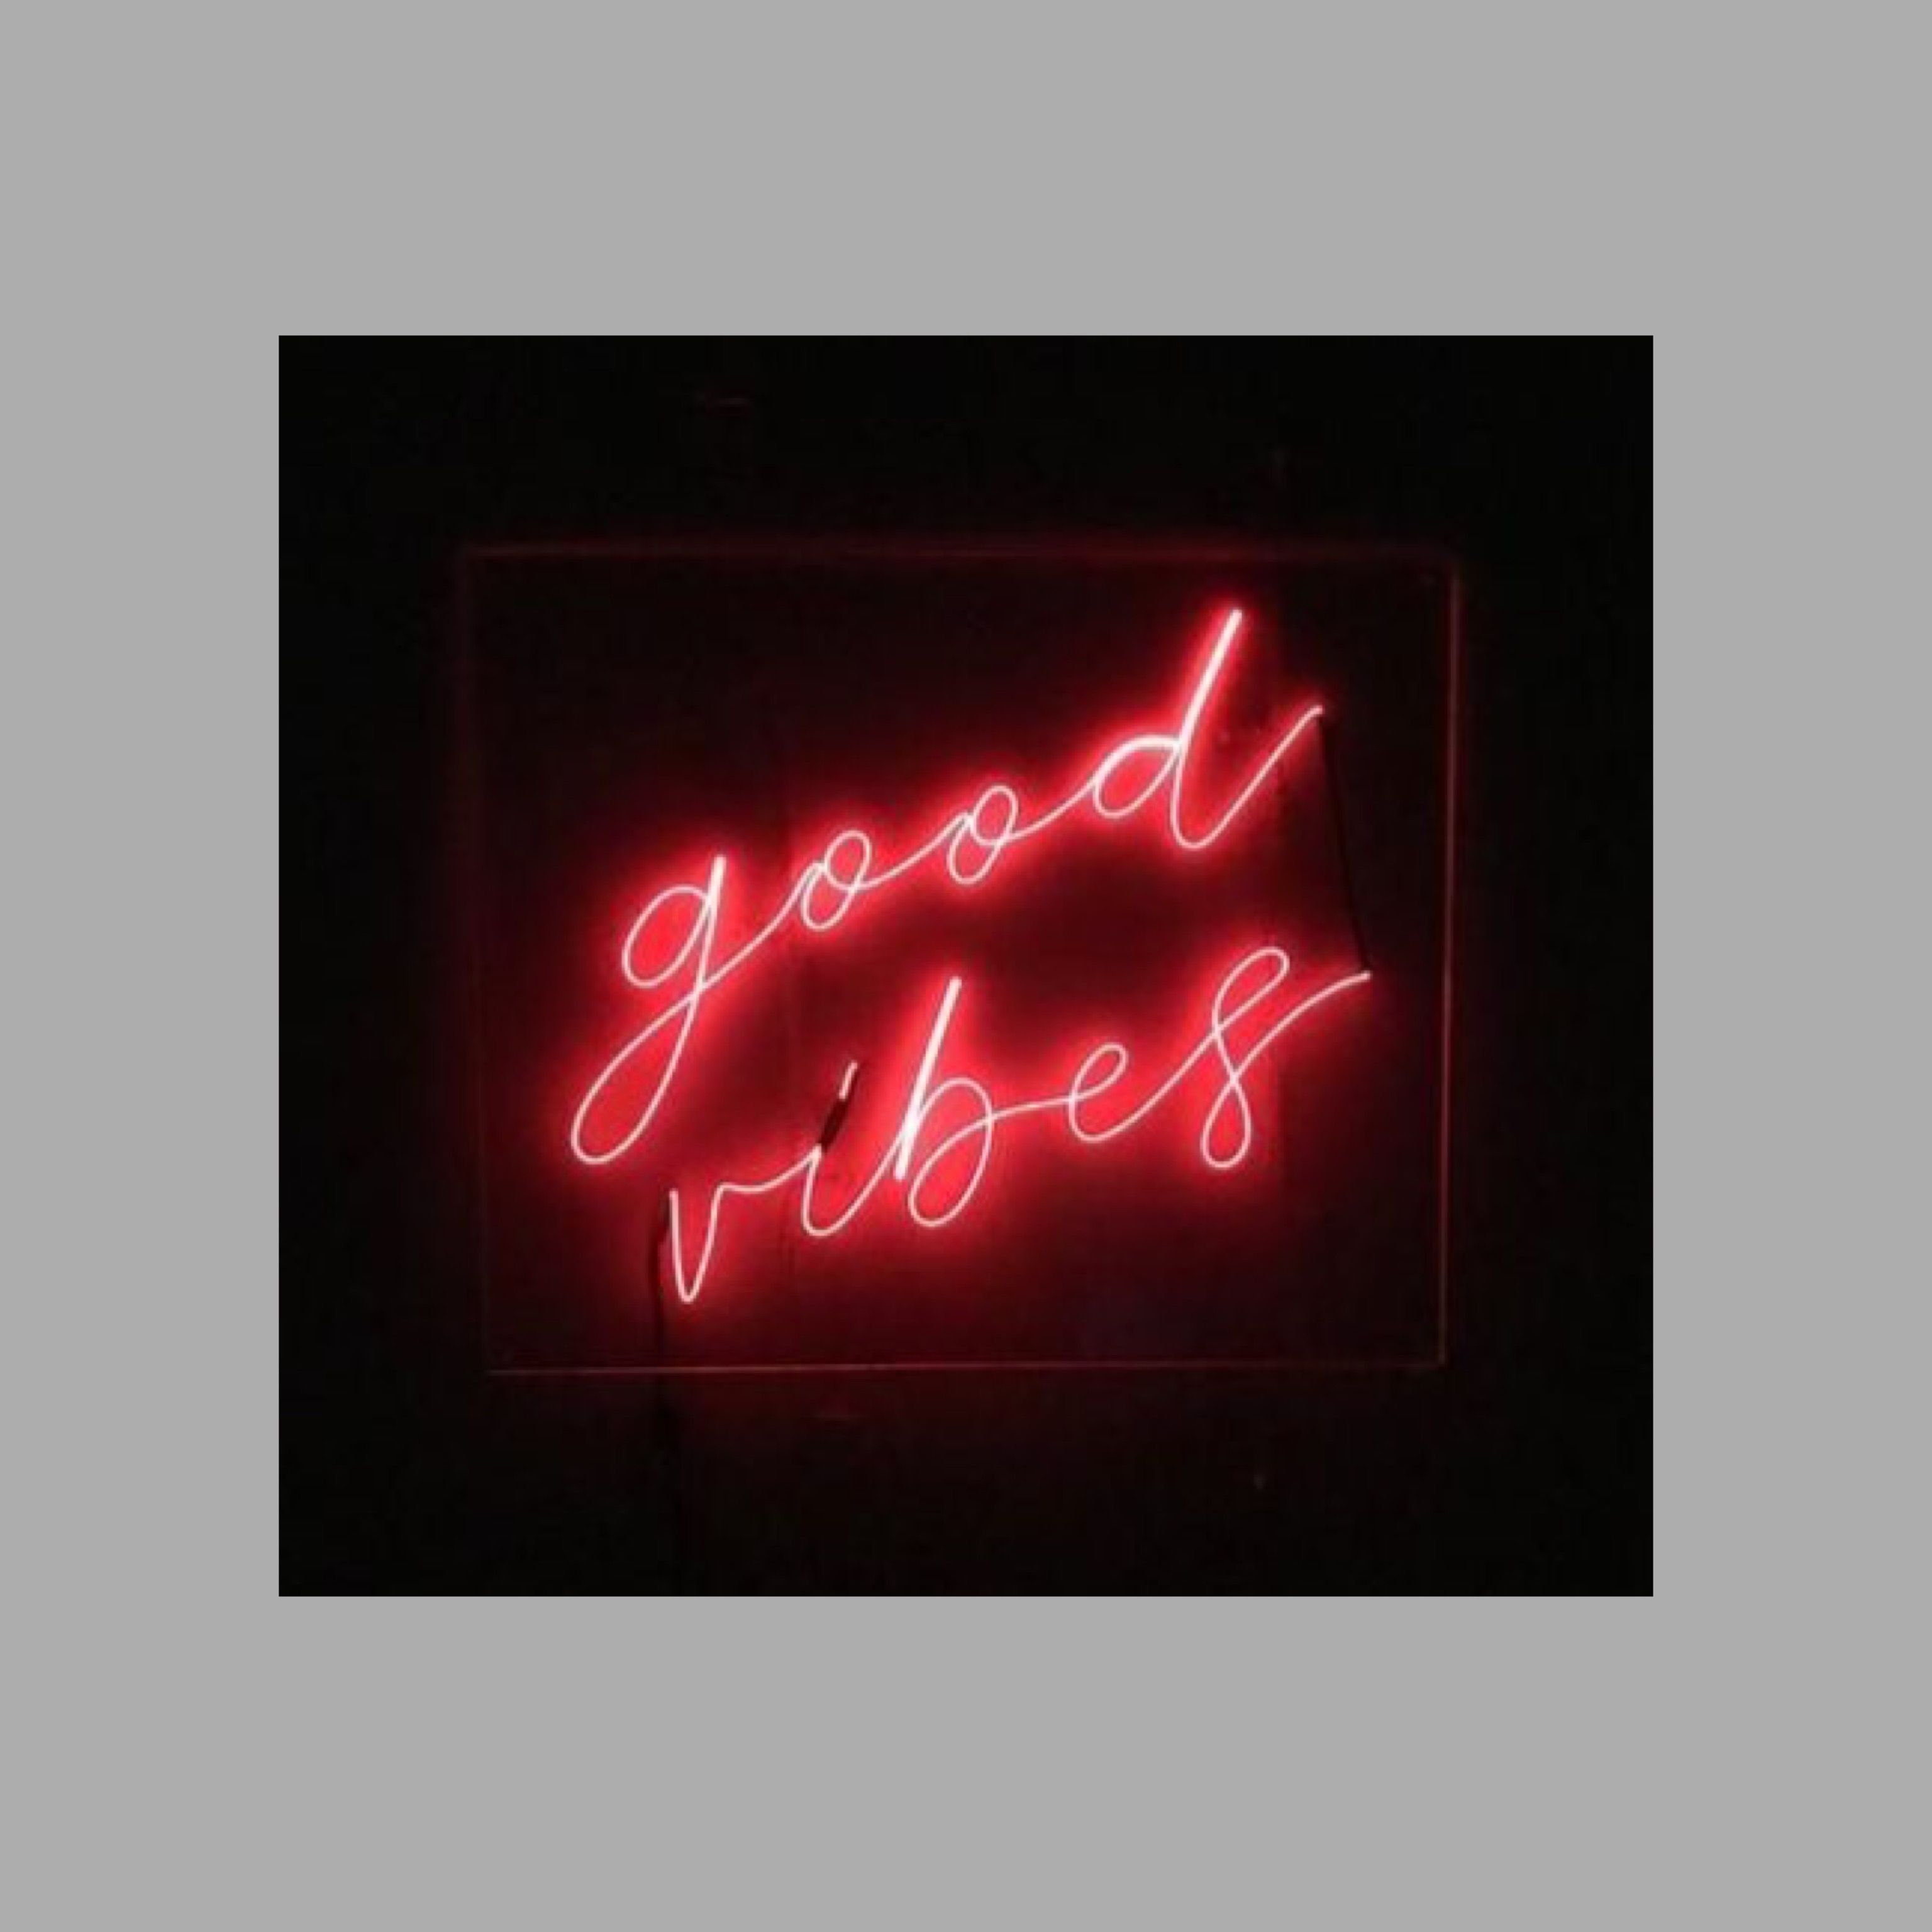 good vibes. Music cover photo, Playlist covers photo, Playlist cover photo asthetic